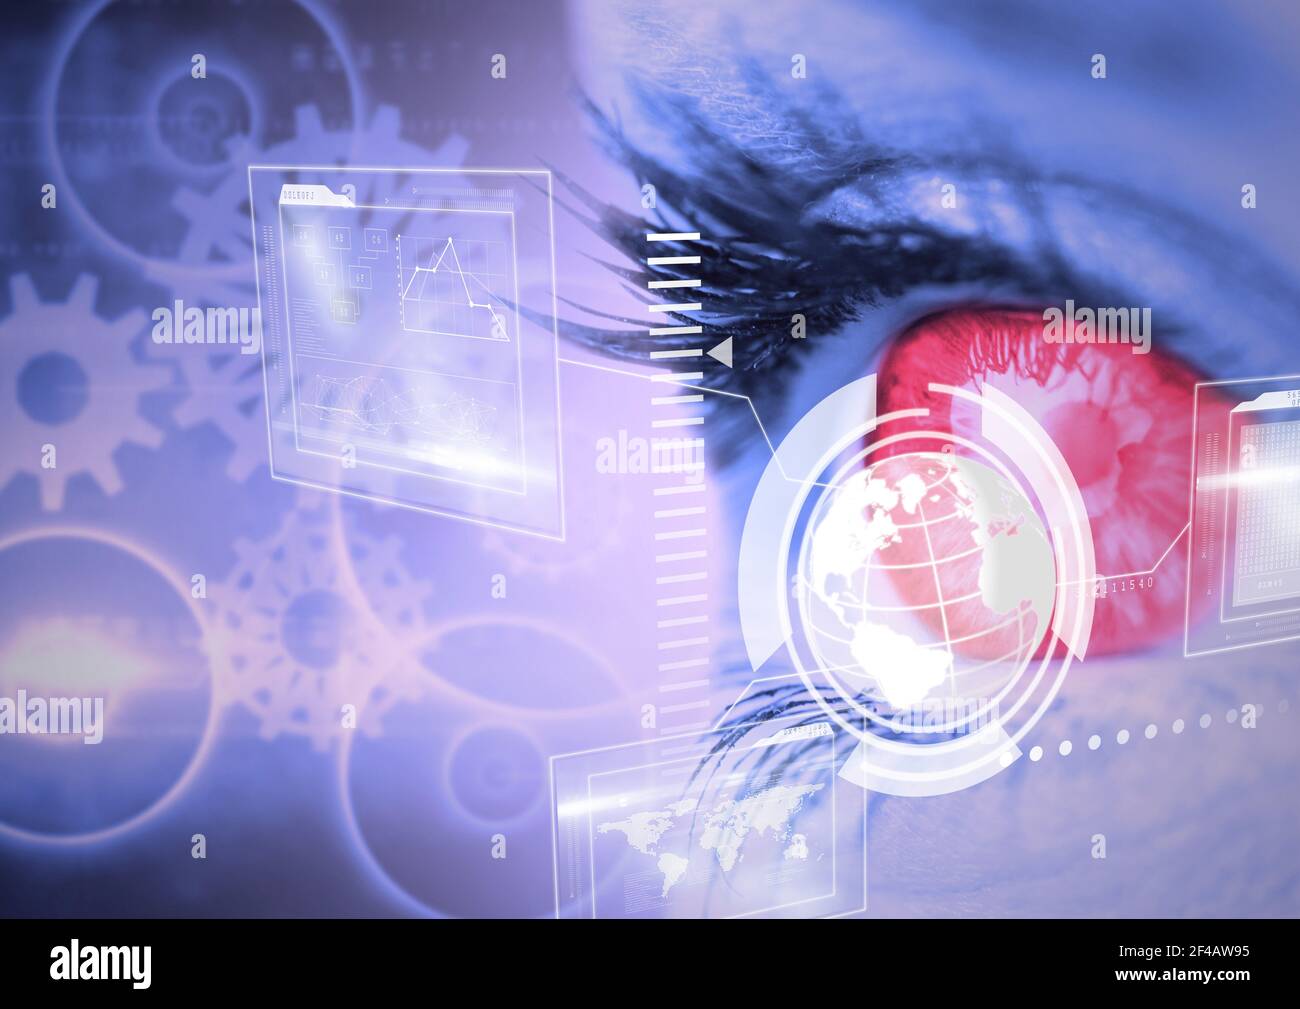 Digital interface with data processing against close up of female human eye Stock Photo